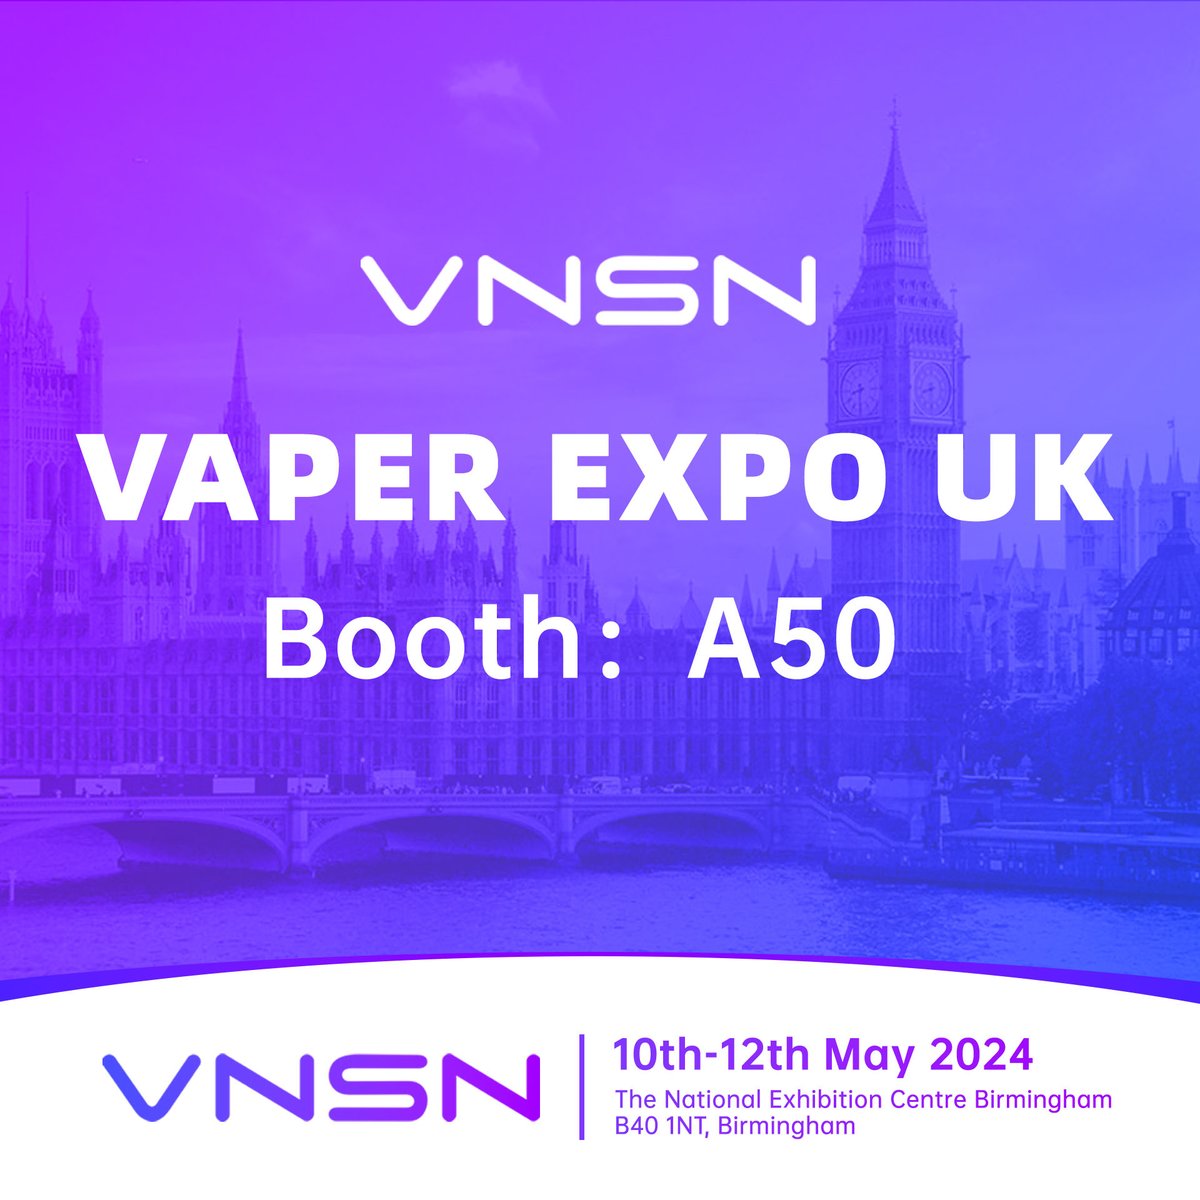 Hello to every VNSN fam.
We sincerely invite you to attend VAPER EXPO UK.🎉 There are lots of freebies and surprises waiting for you.🎁

Booth: A50
Time: 12th-10th May 2024
Location: The National Exhibition Centre Birmingham B40 1NT, Birmingham, UK